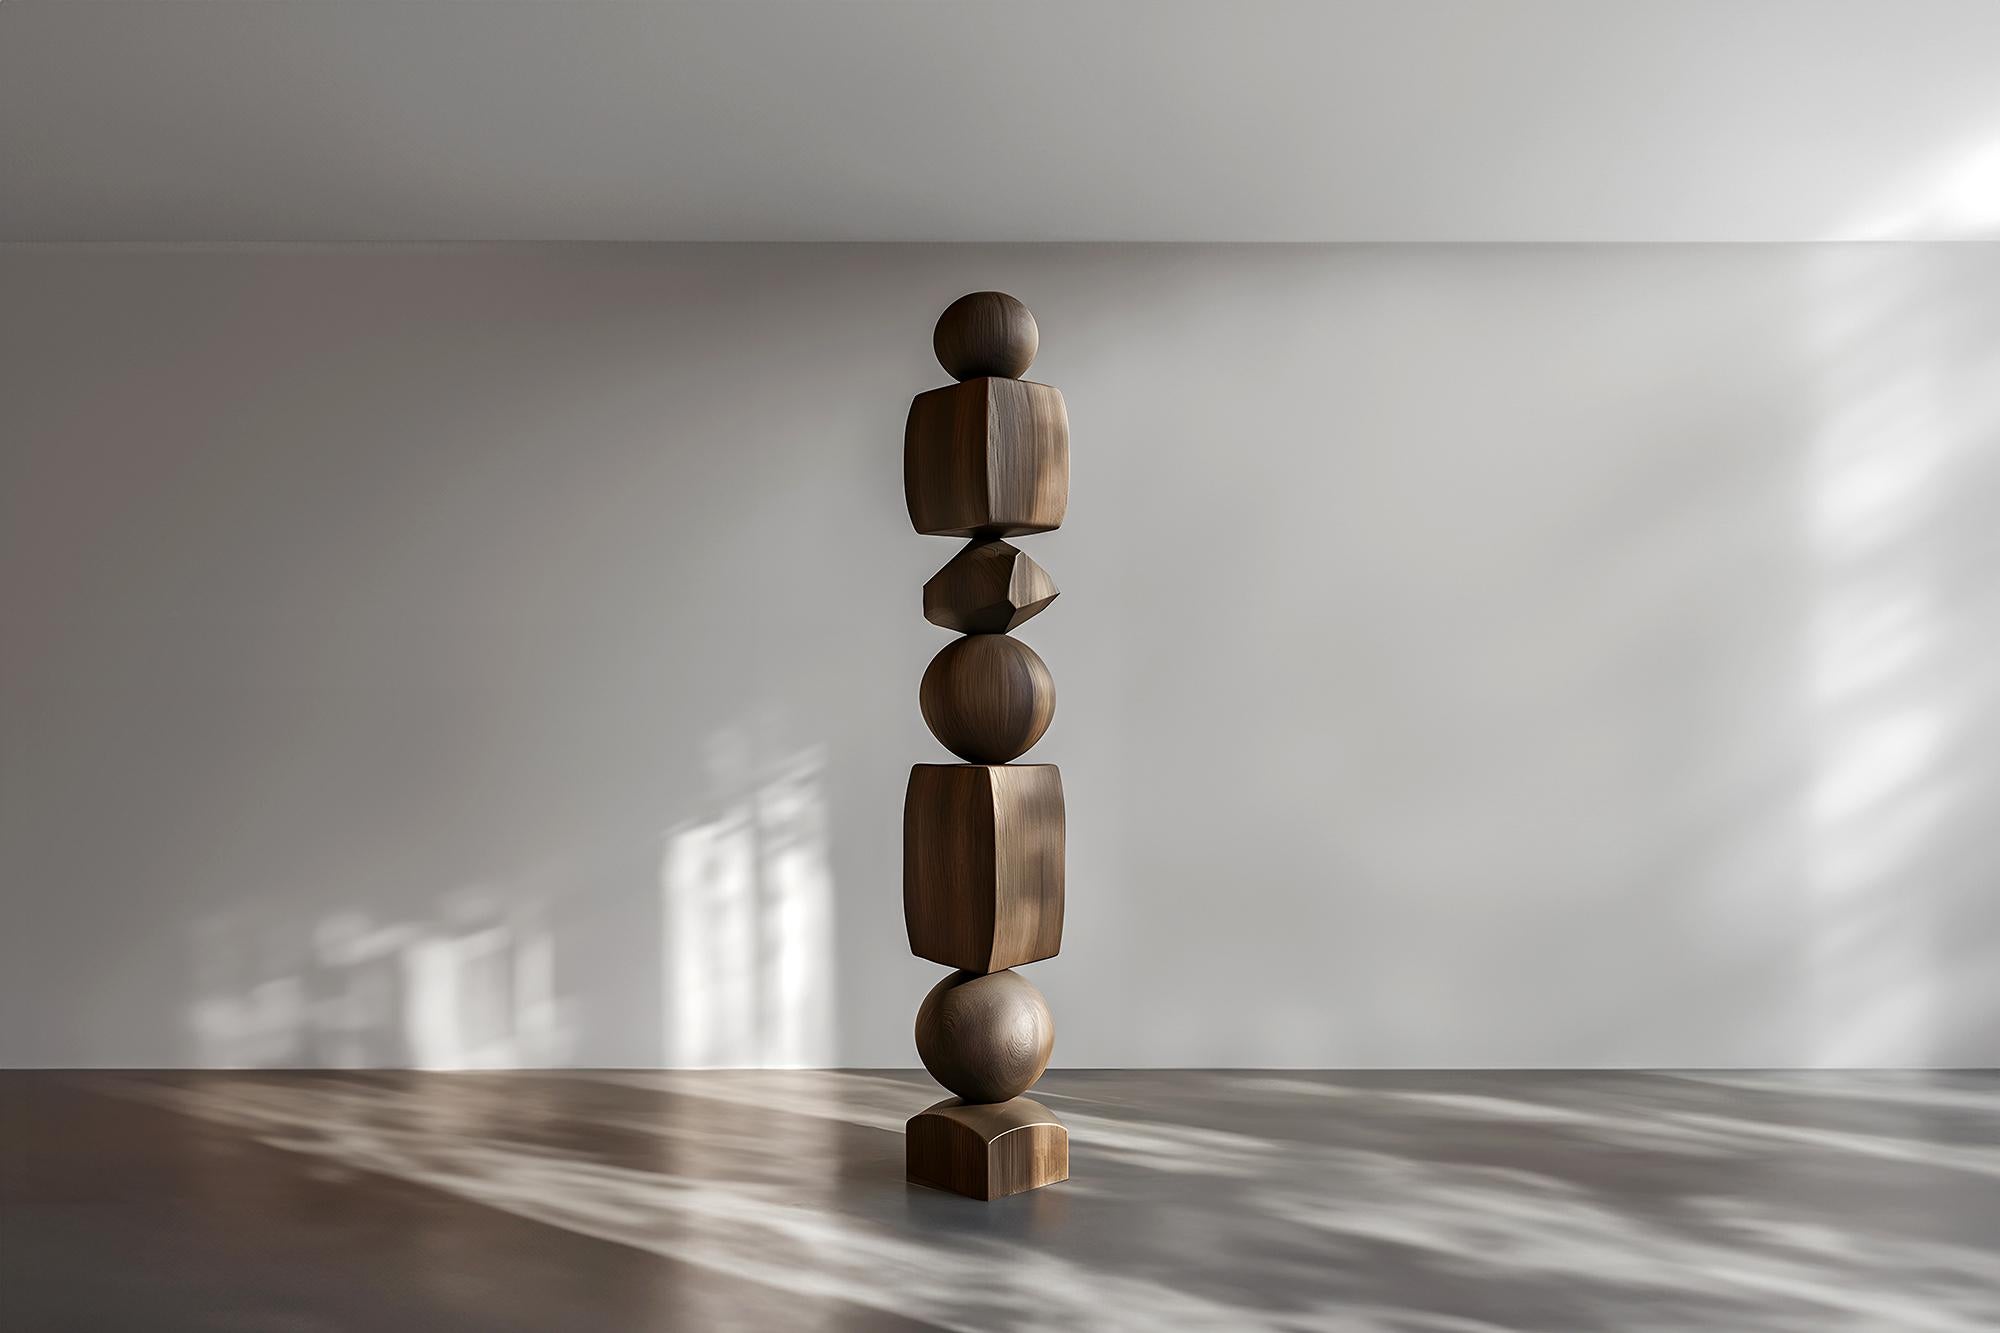 Burned Oak's Sleek Dark Design in Abstract Totem Form, Still Stand No87

——


Joel Escalona's wooden standing sculptures are objects of raw beauty and serene grace. Each one is a testament to the power of the material, with smooth curves that flow